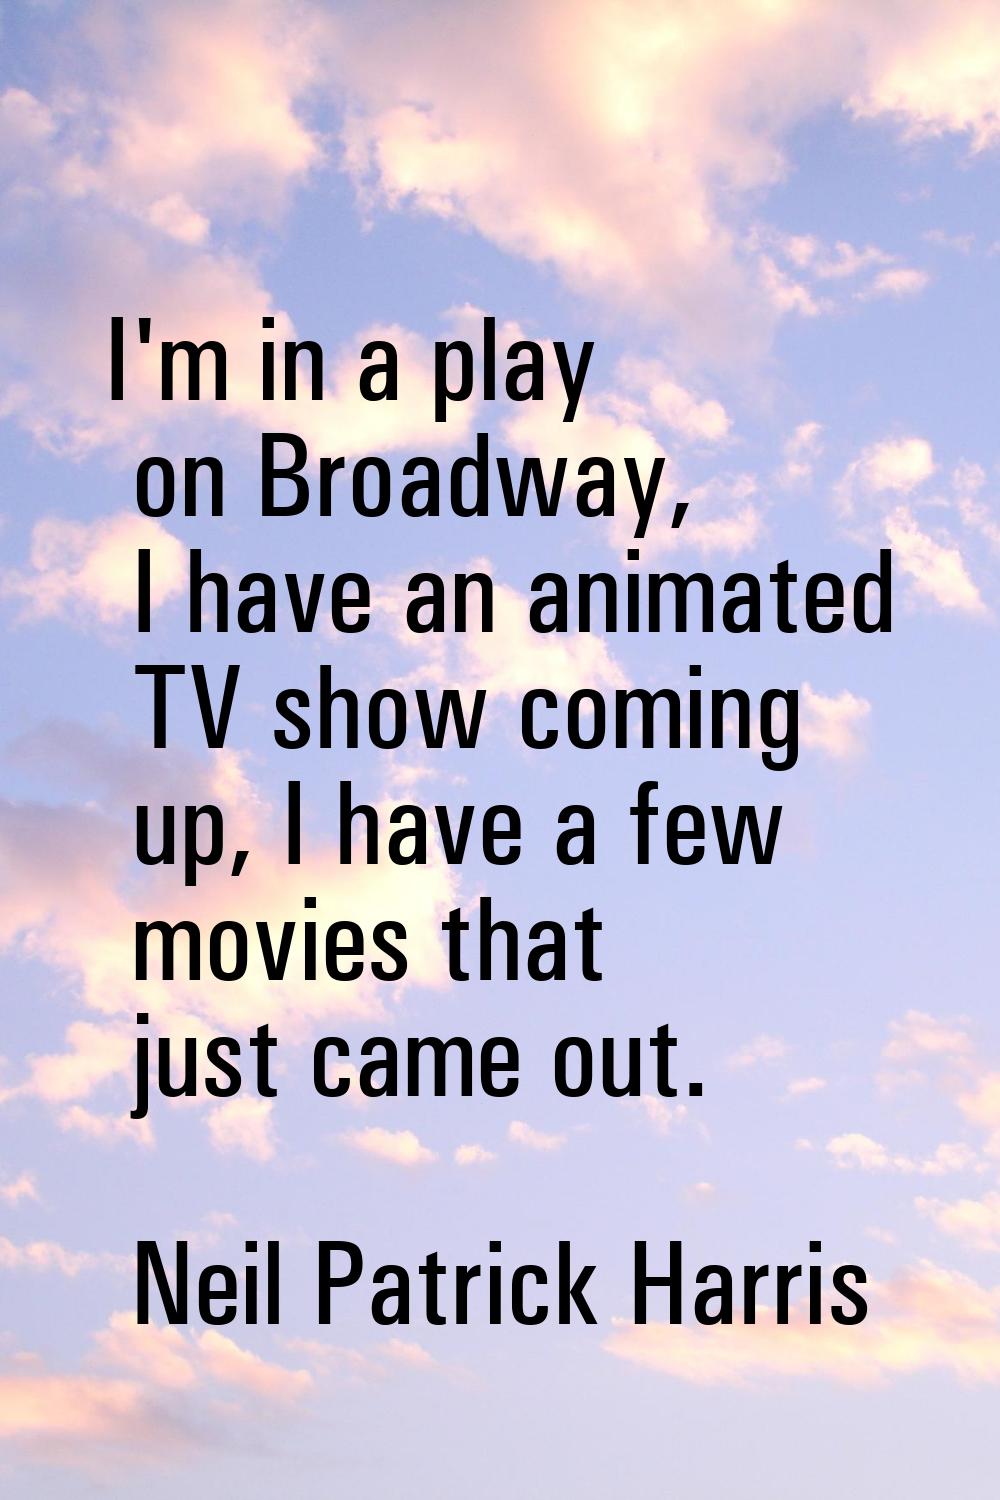 I'm in a play on Broadway, I have an animated TV show coming up, I have a few movies that just came